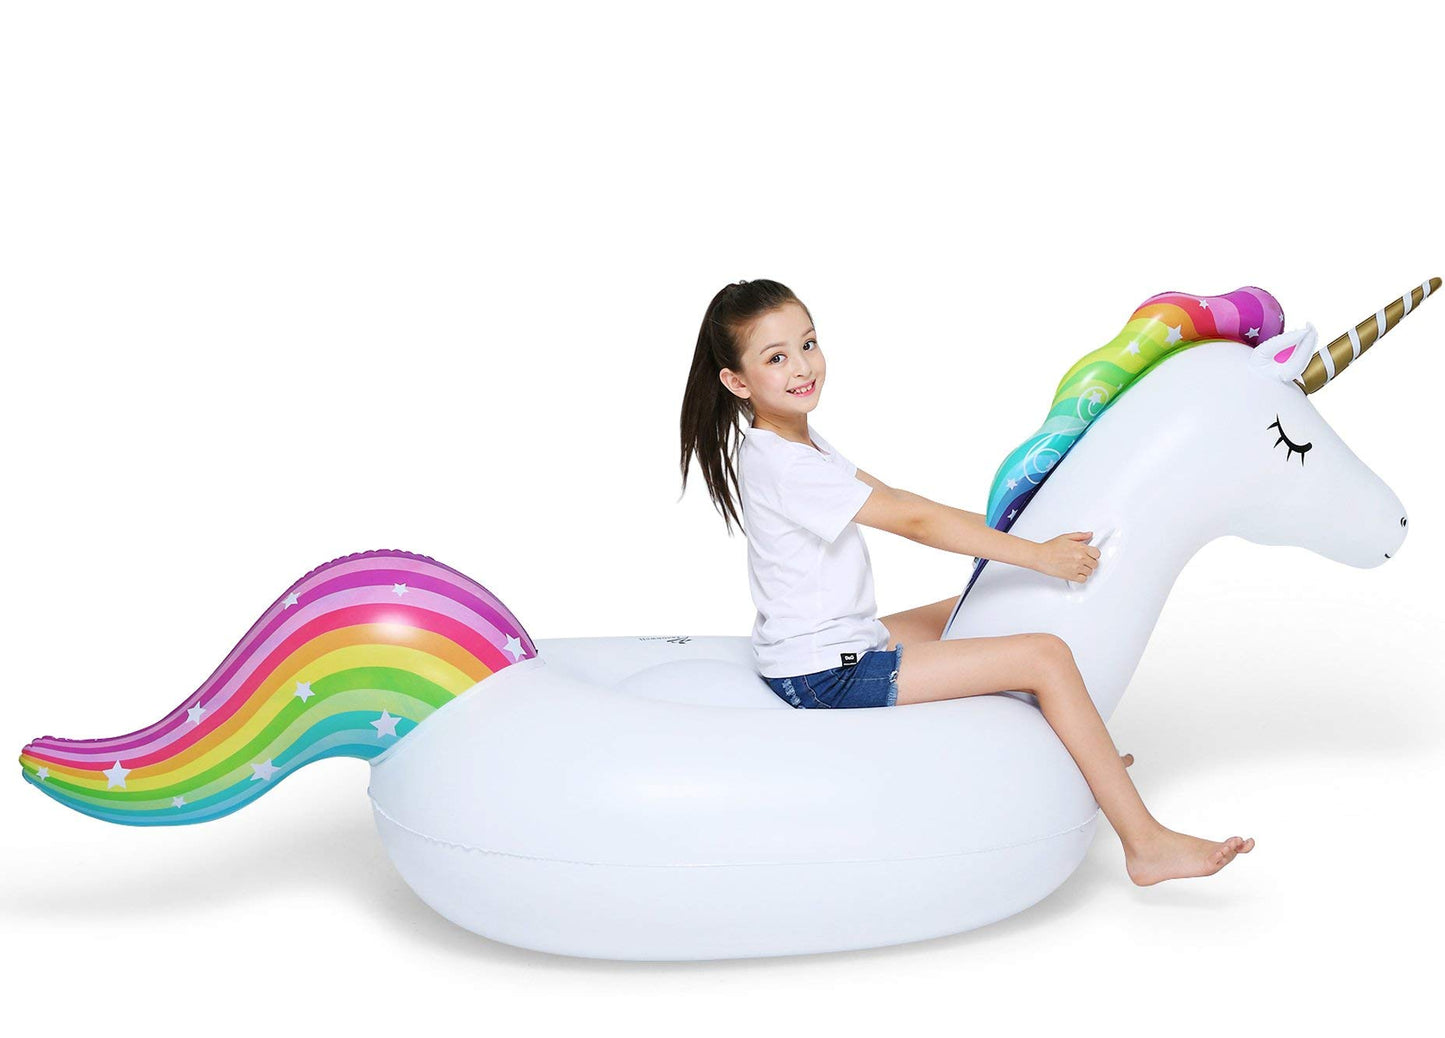 Jasonwell Big Inflatable Unicorn Pool Float Floatie Ride On with Fast Valves Large Rideable Blow Up Summer Beach Swimming Pool Party Lounge Raft Decorations Toys Kids Adults